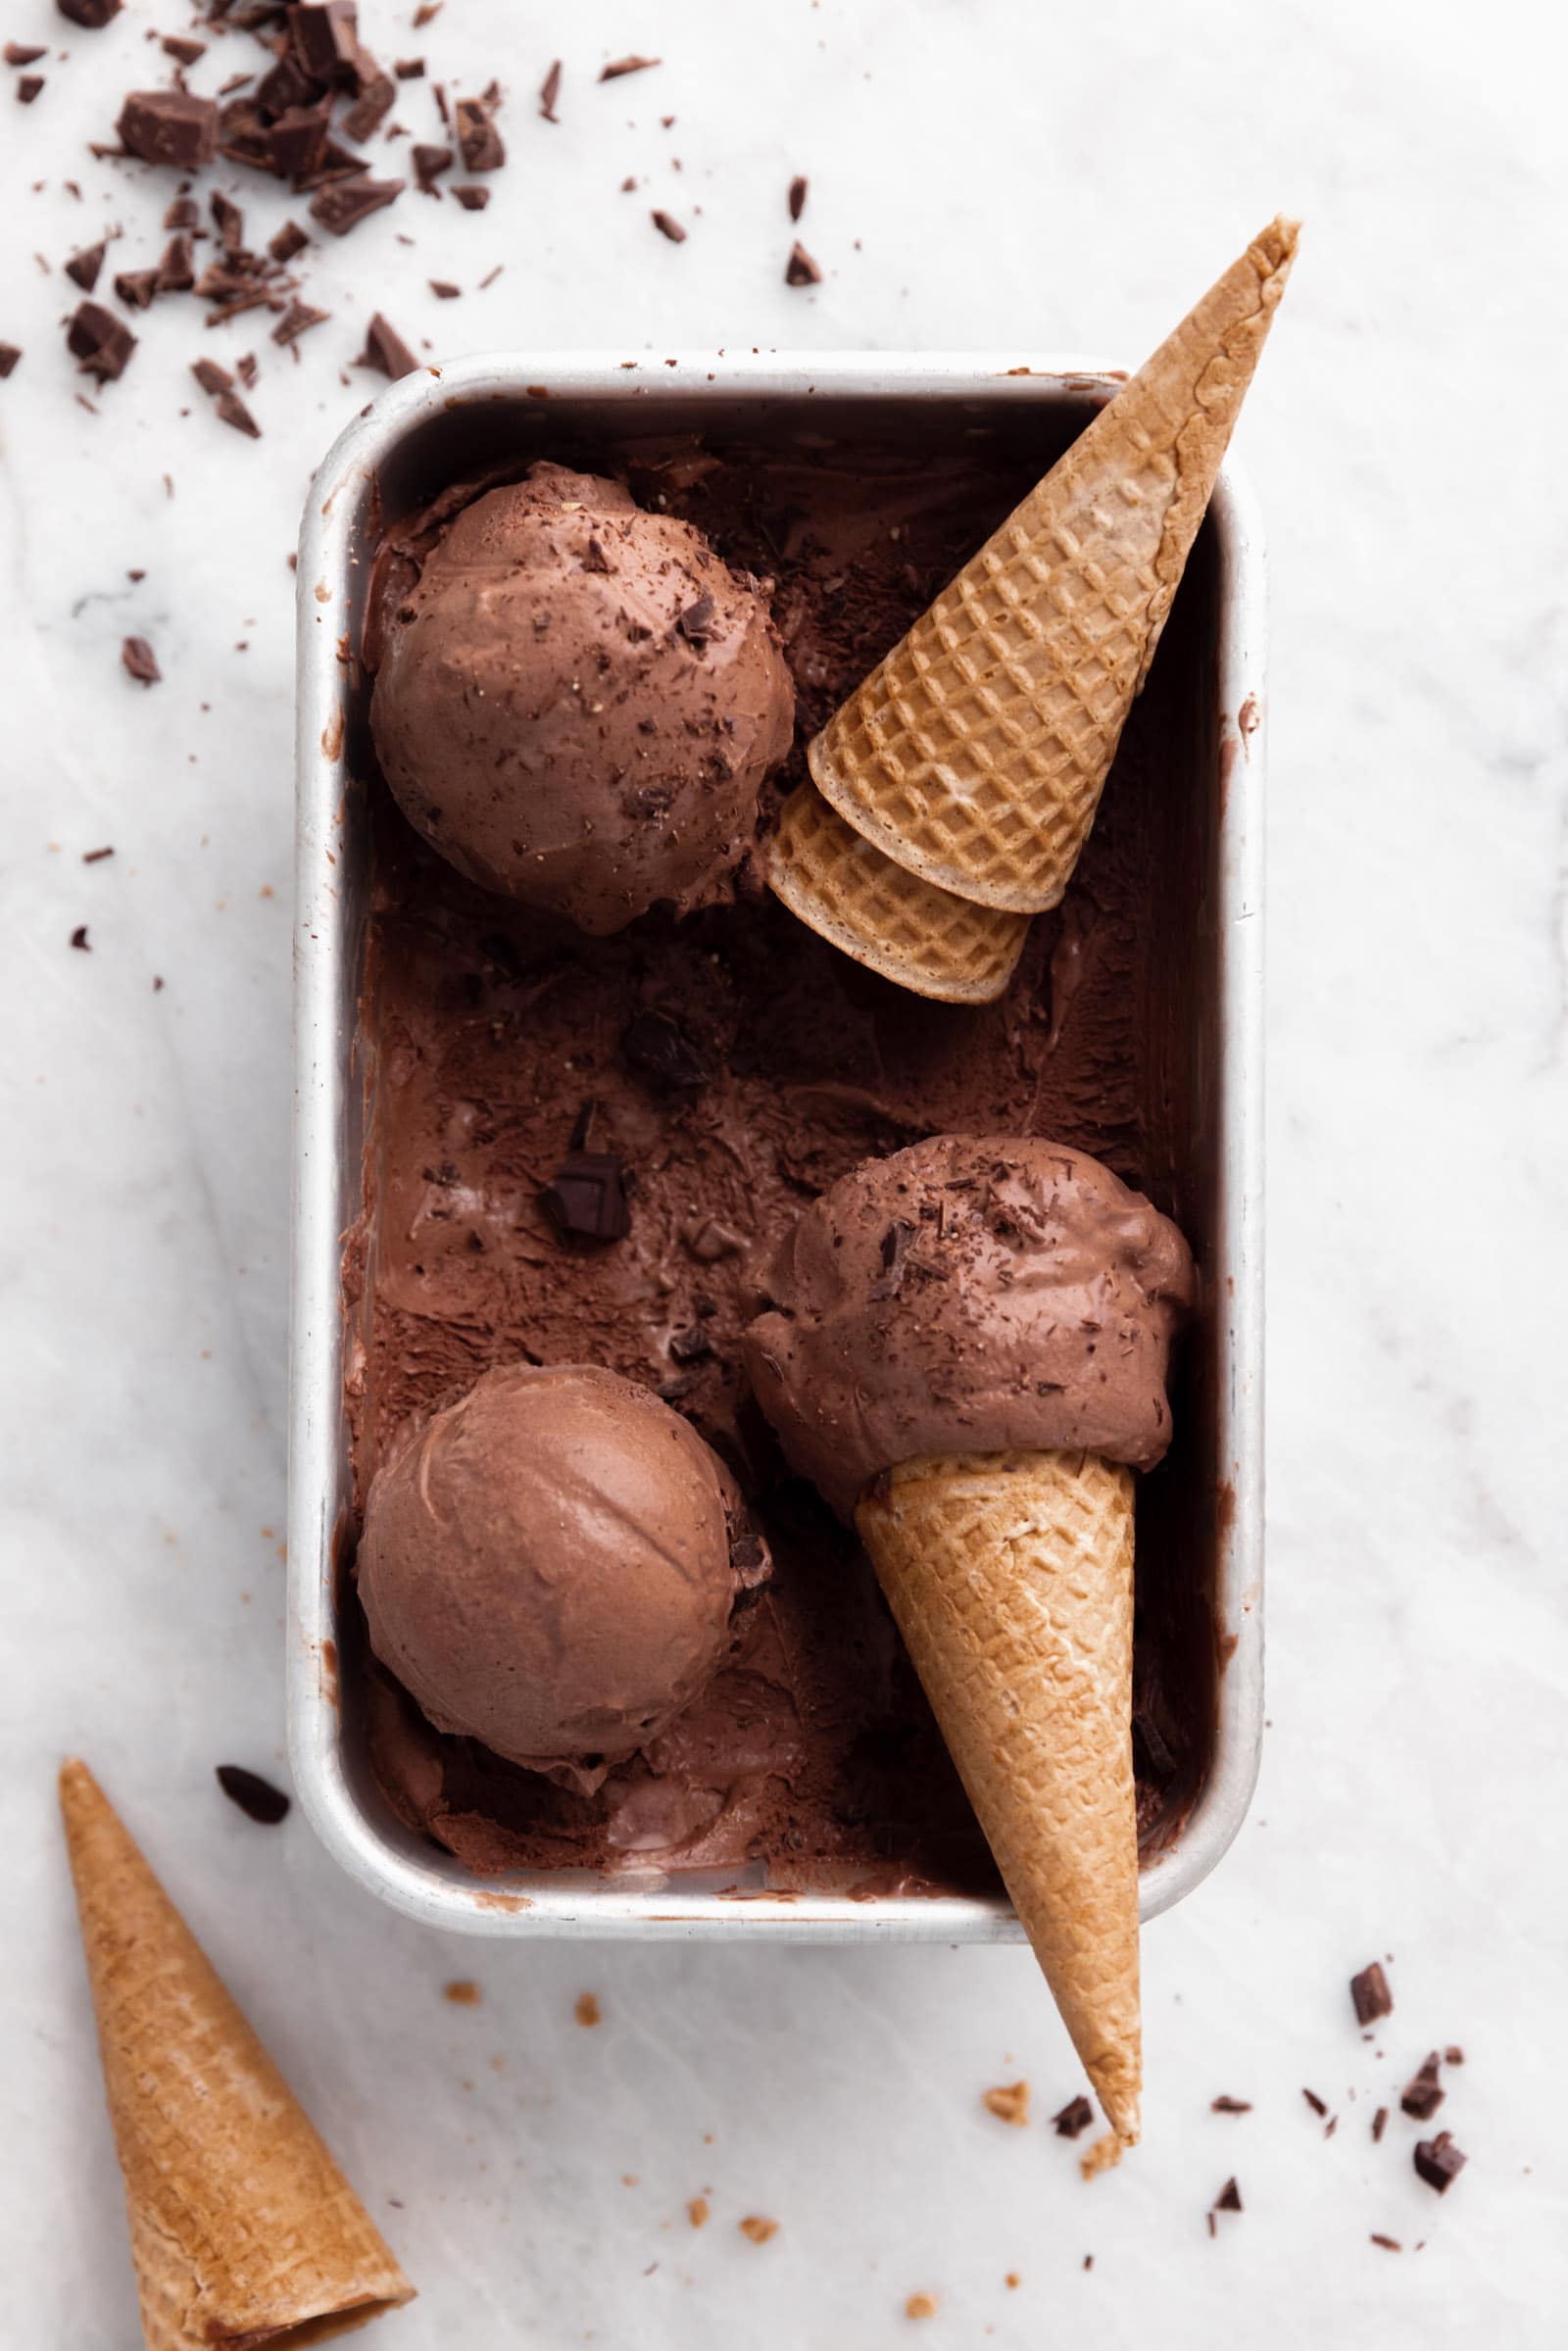 This Incredible Ice Cream Tray Lets You Make Homemade Ice Cream In